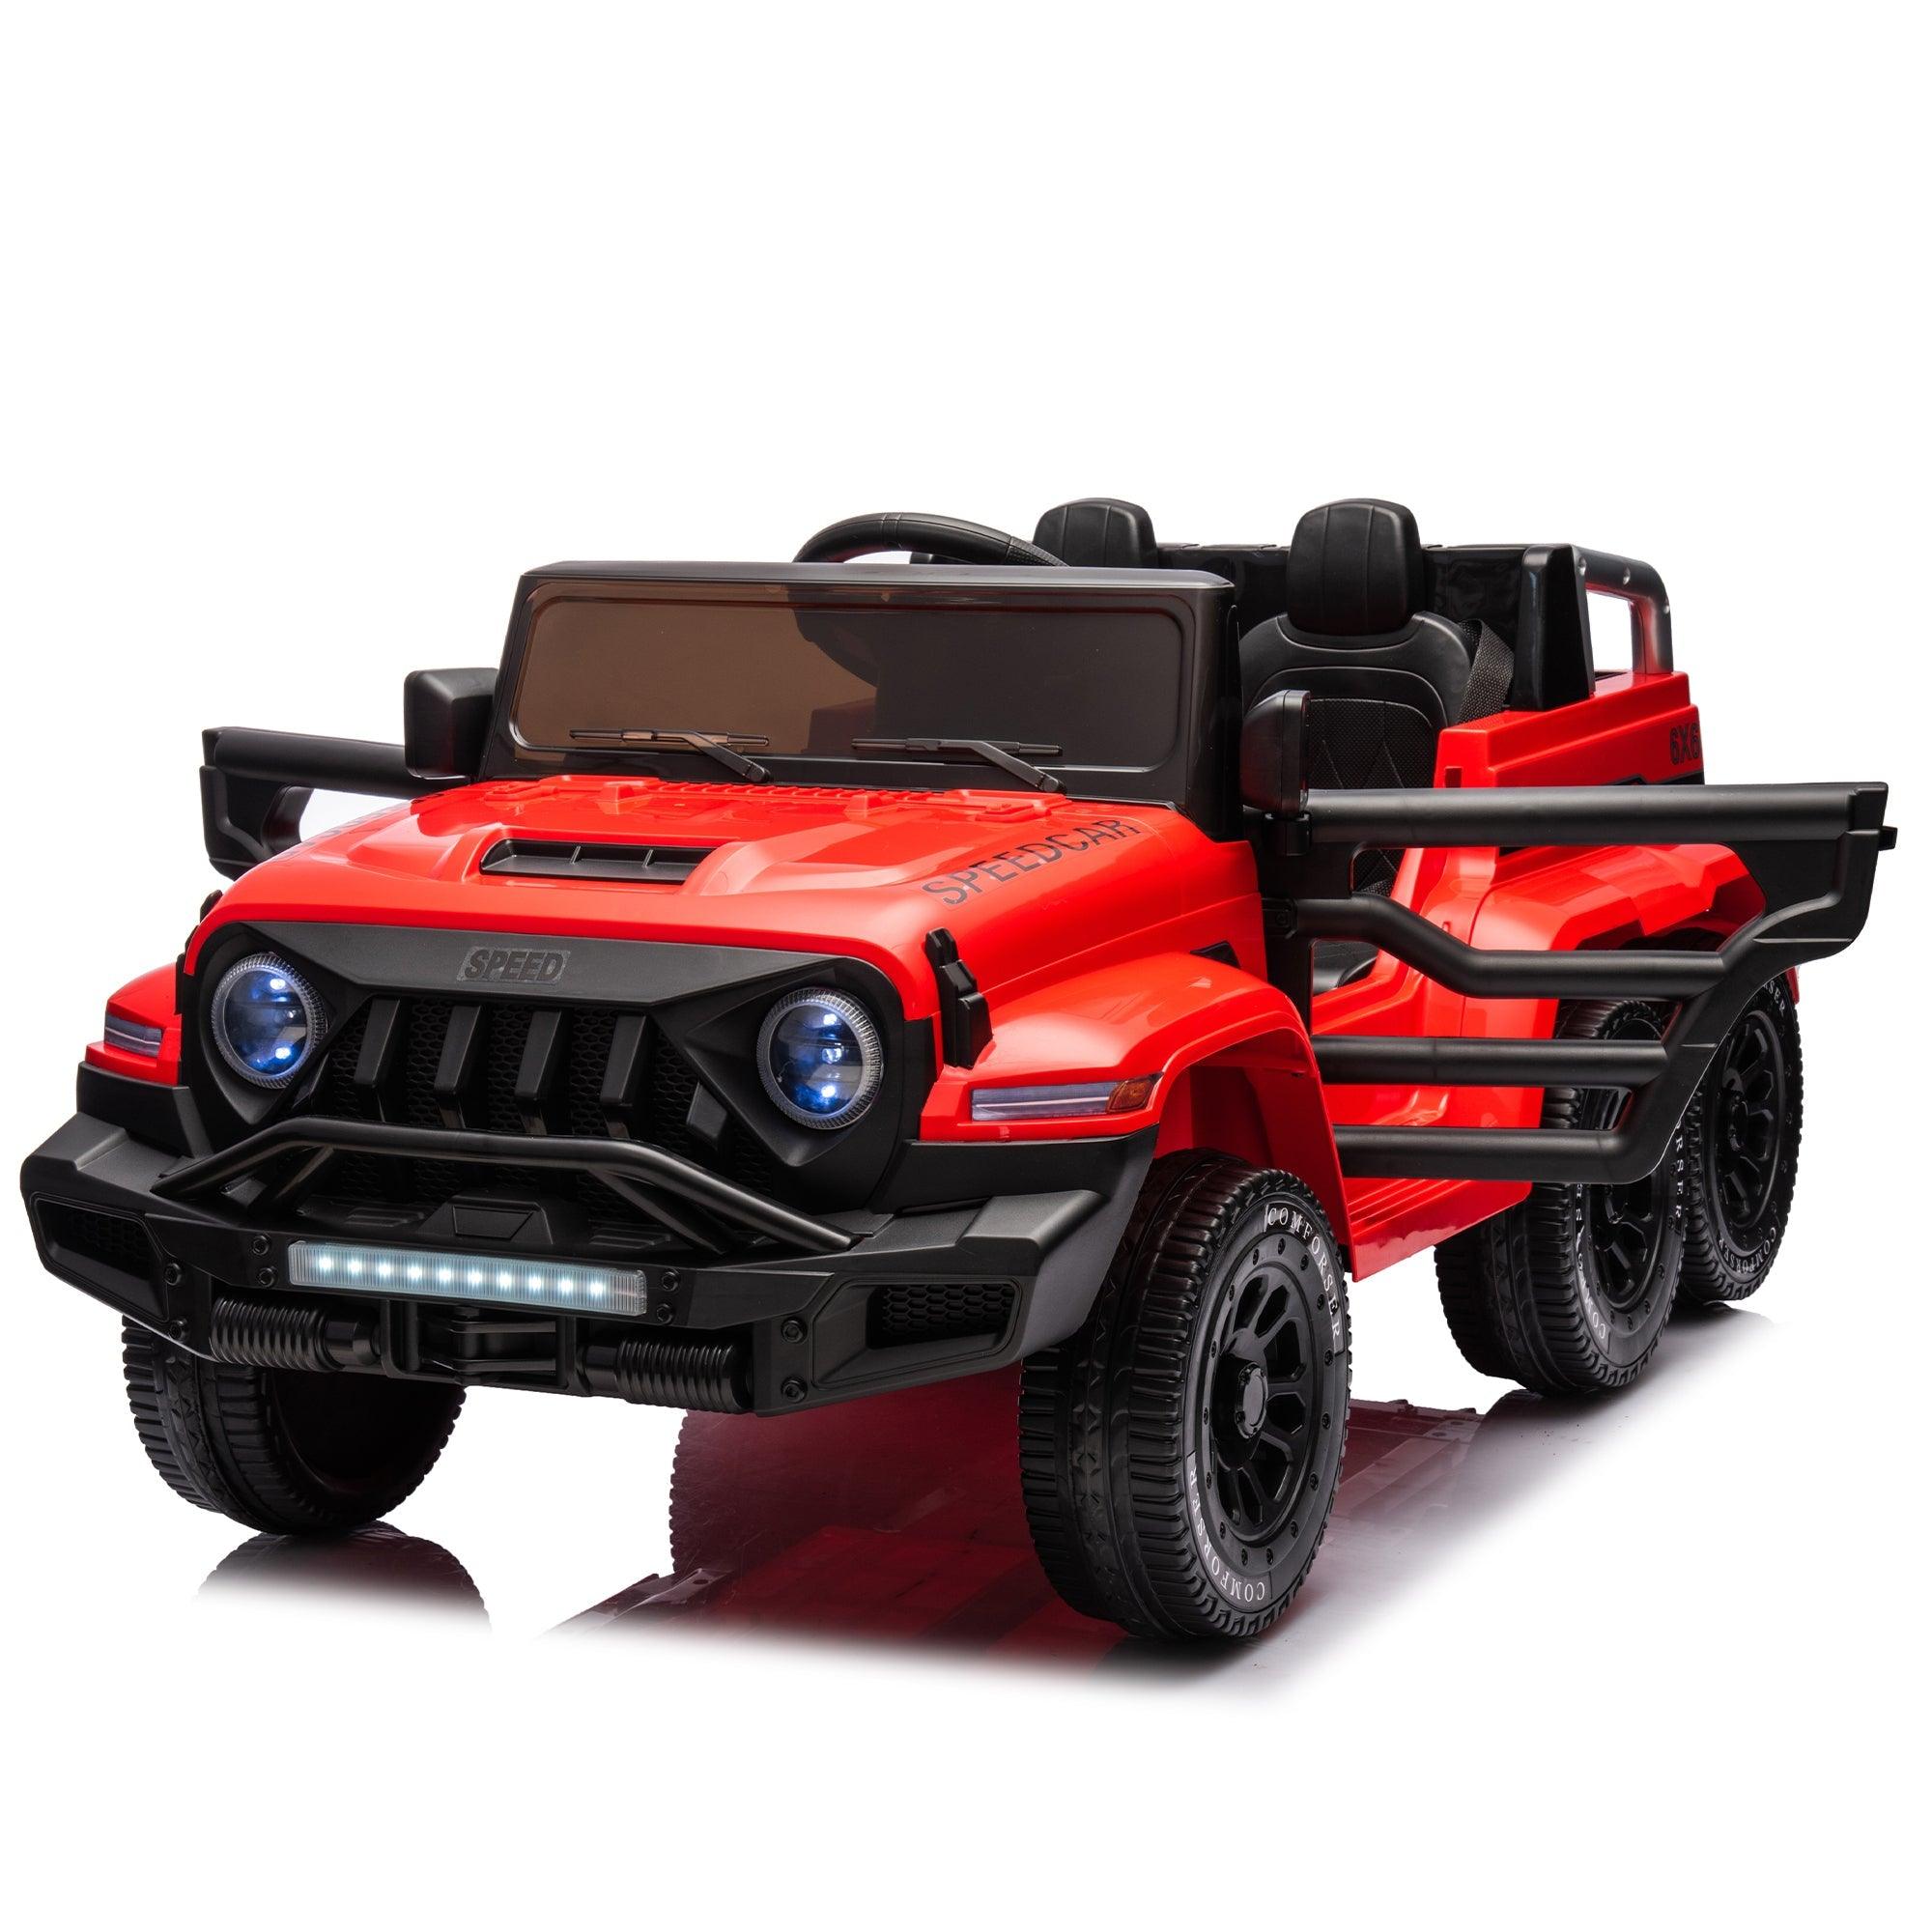 24V Ride On Car for Kids Battery Powered Ride On 4WD Toys with Remote Control, Parents Can Assist in Driving, Music and Lights, Five-Point Safety Belt, Rocking chair mode for back-and-forth swinging LamCham